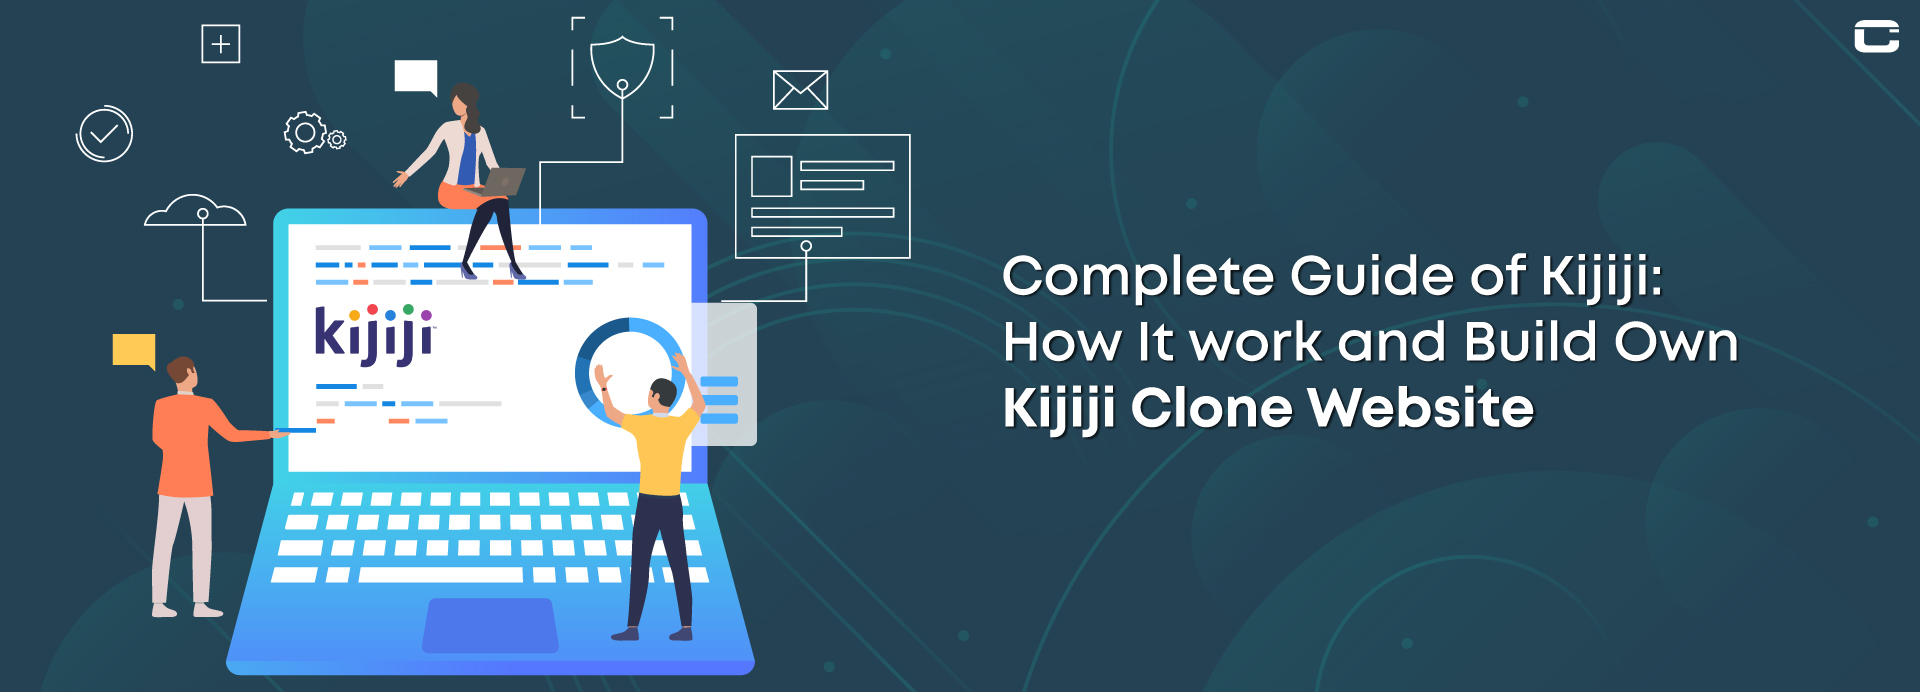 Complete Guide of Kijiji: How It works and Build Own Kijiji Clone Website